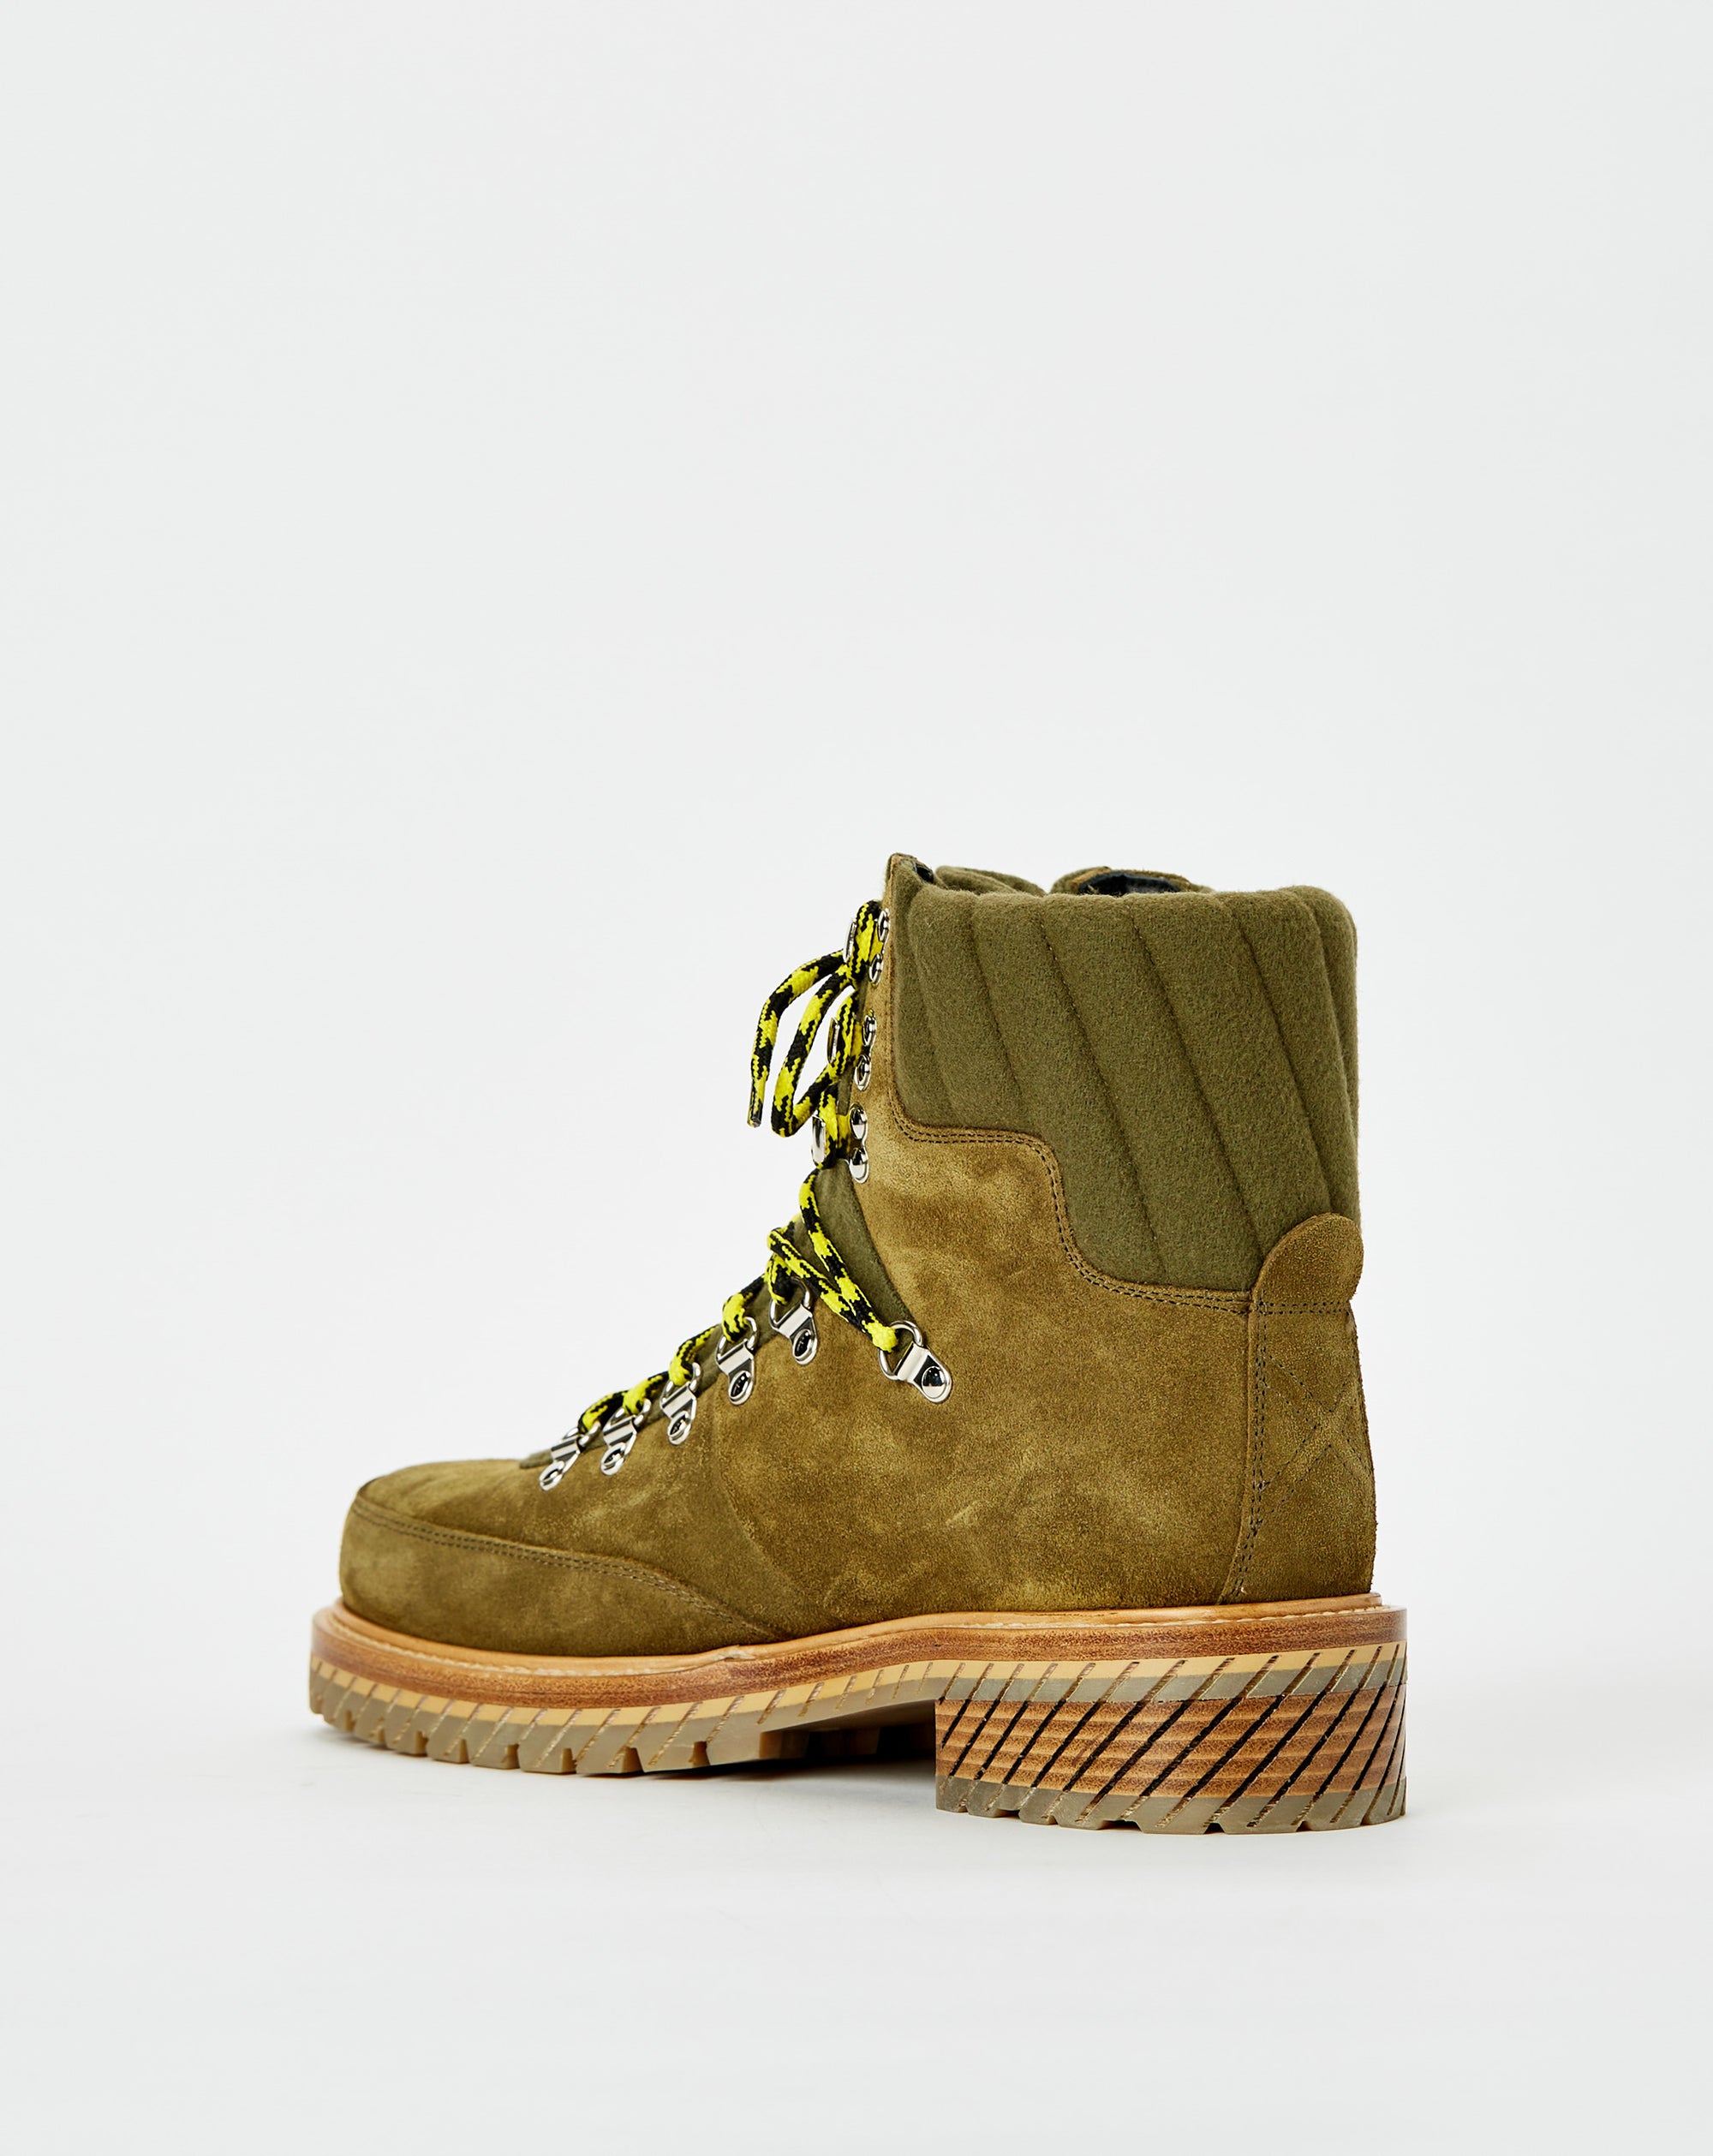 Off-White Gstaad Suede Lace Up Boot - Rule of Next Footwear